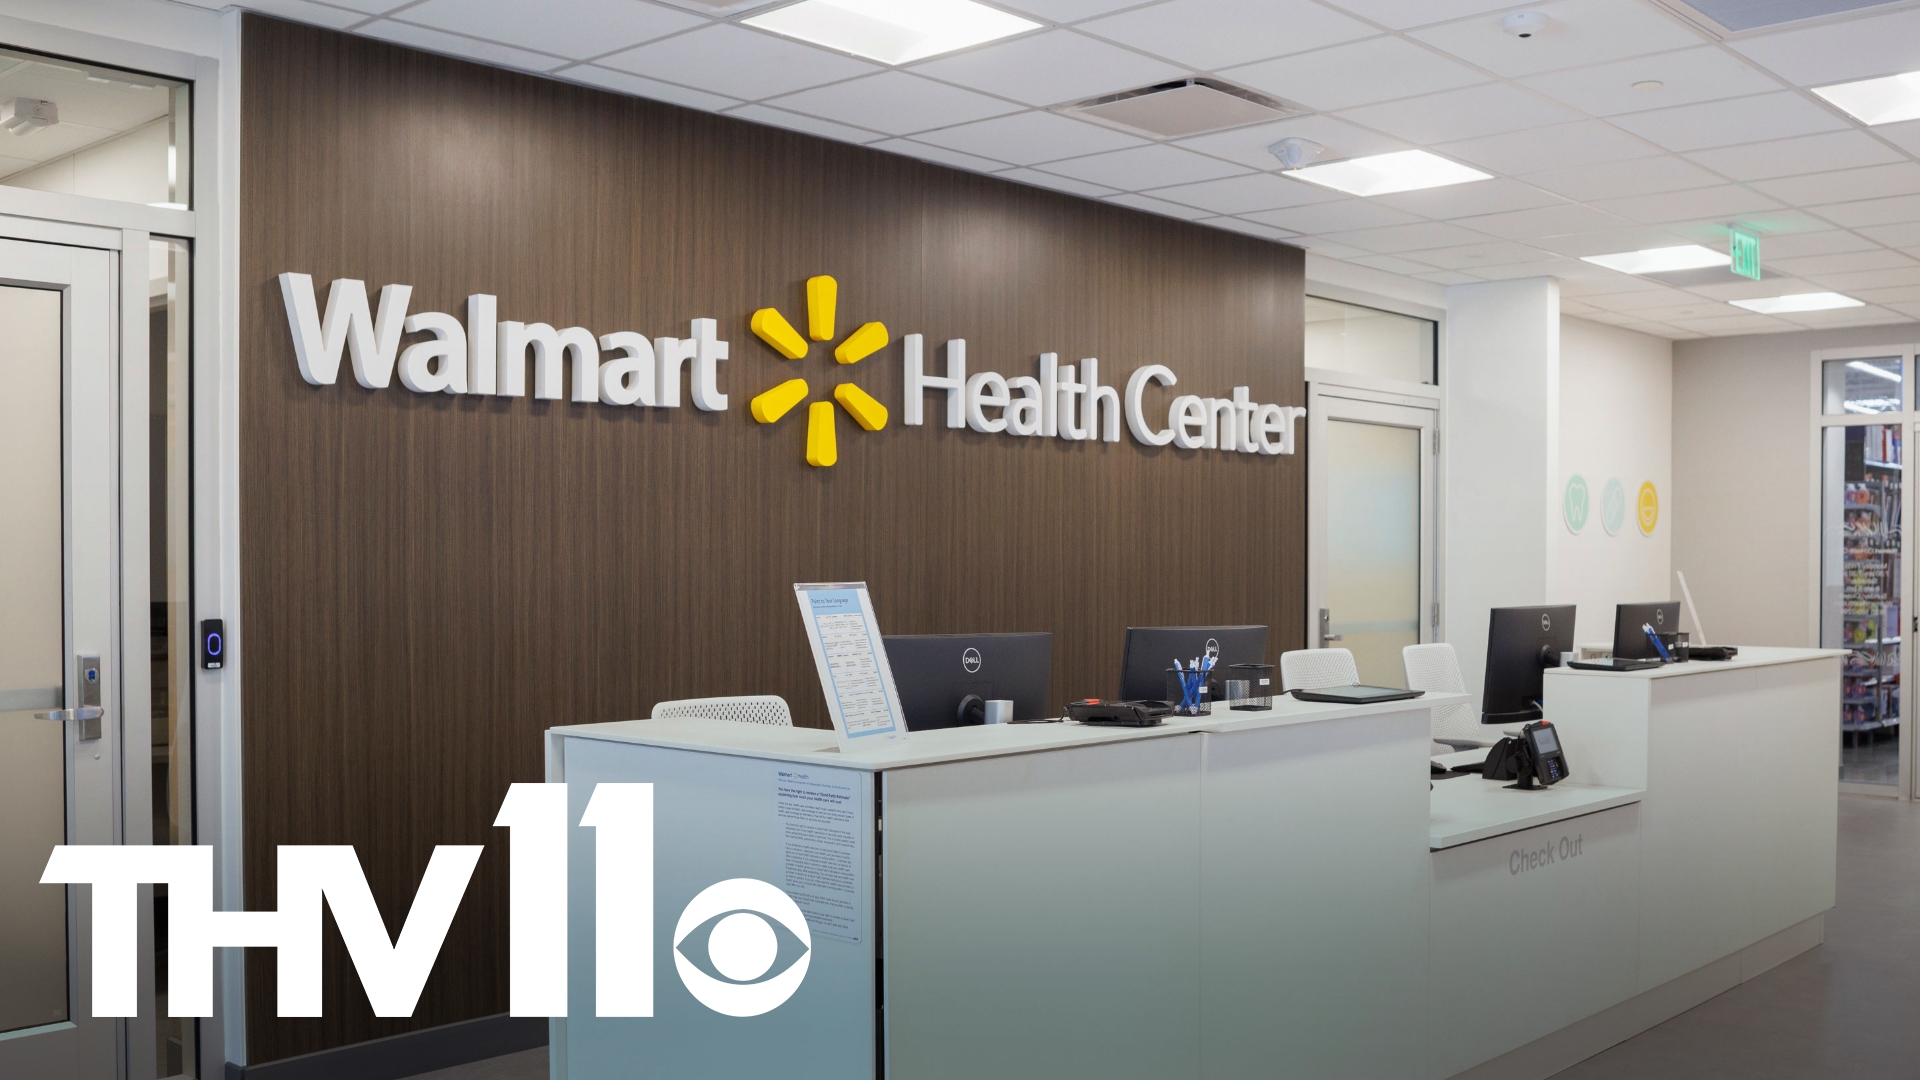 Walmart has announced they are closing their health centers and virtual care service as they have struggled to find success with the offerings.